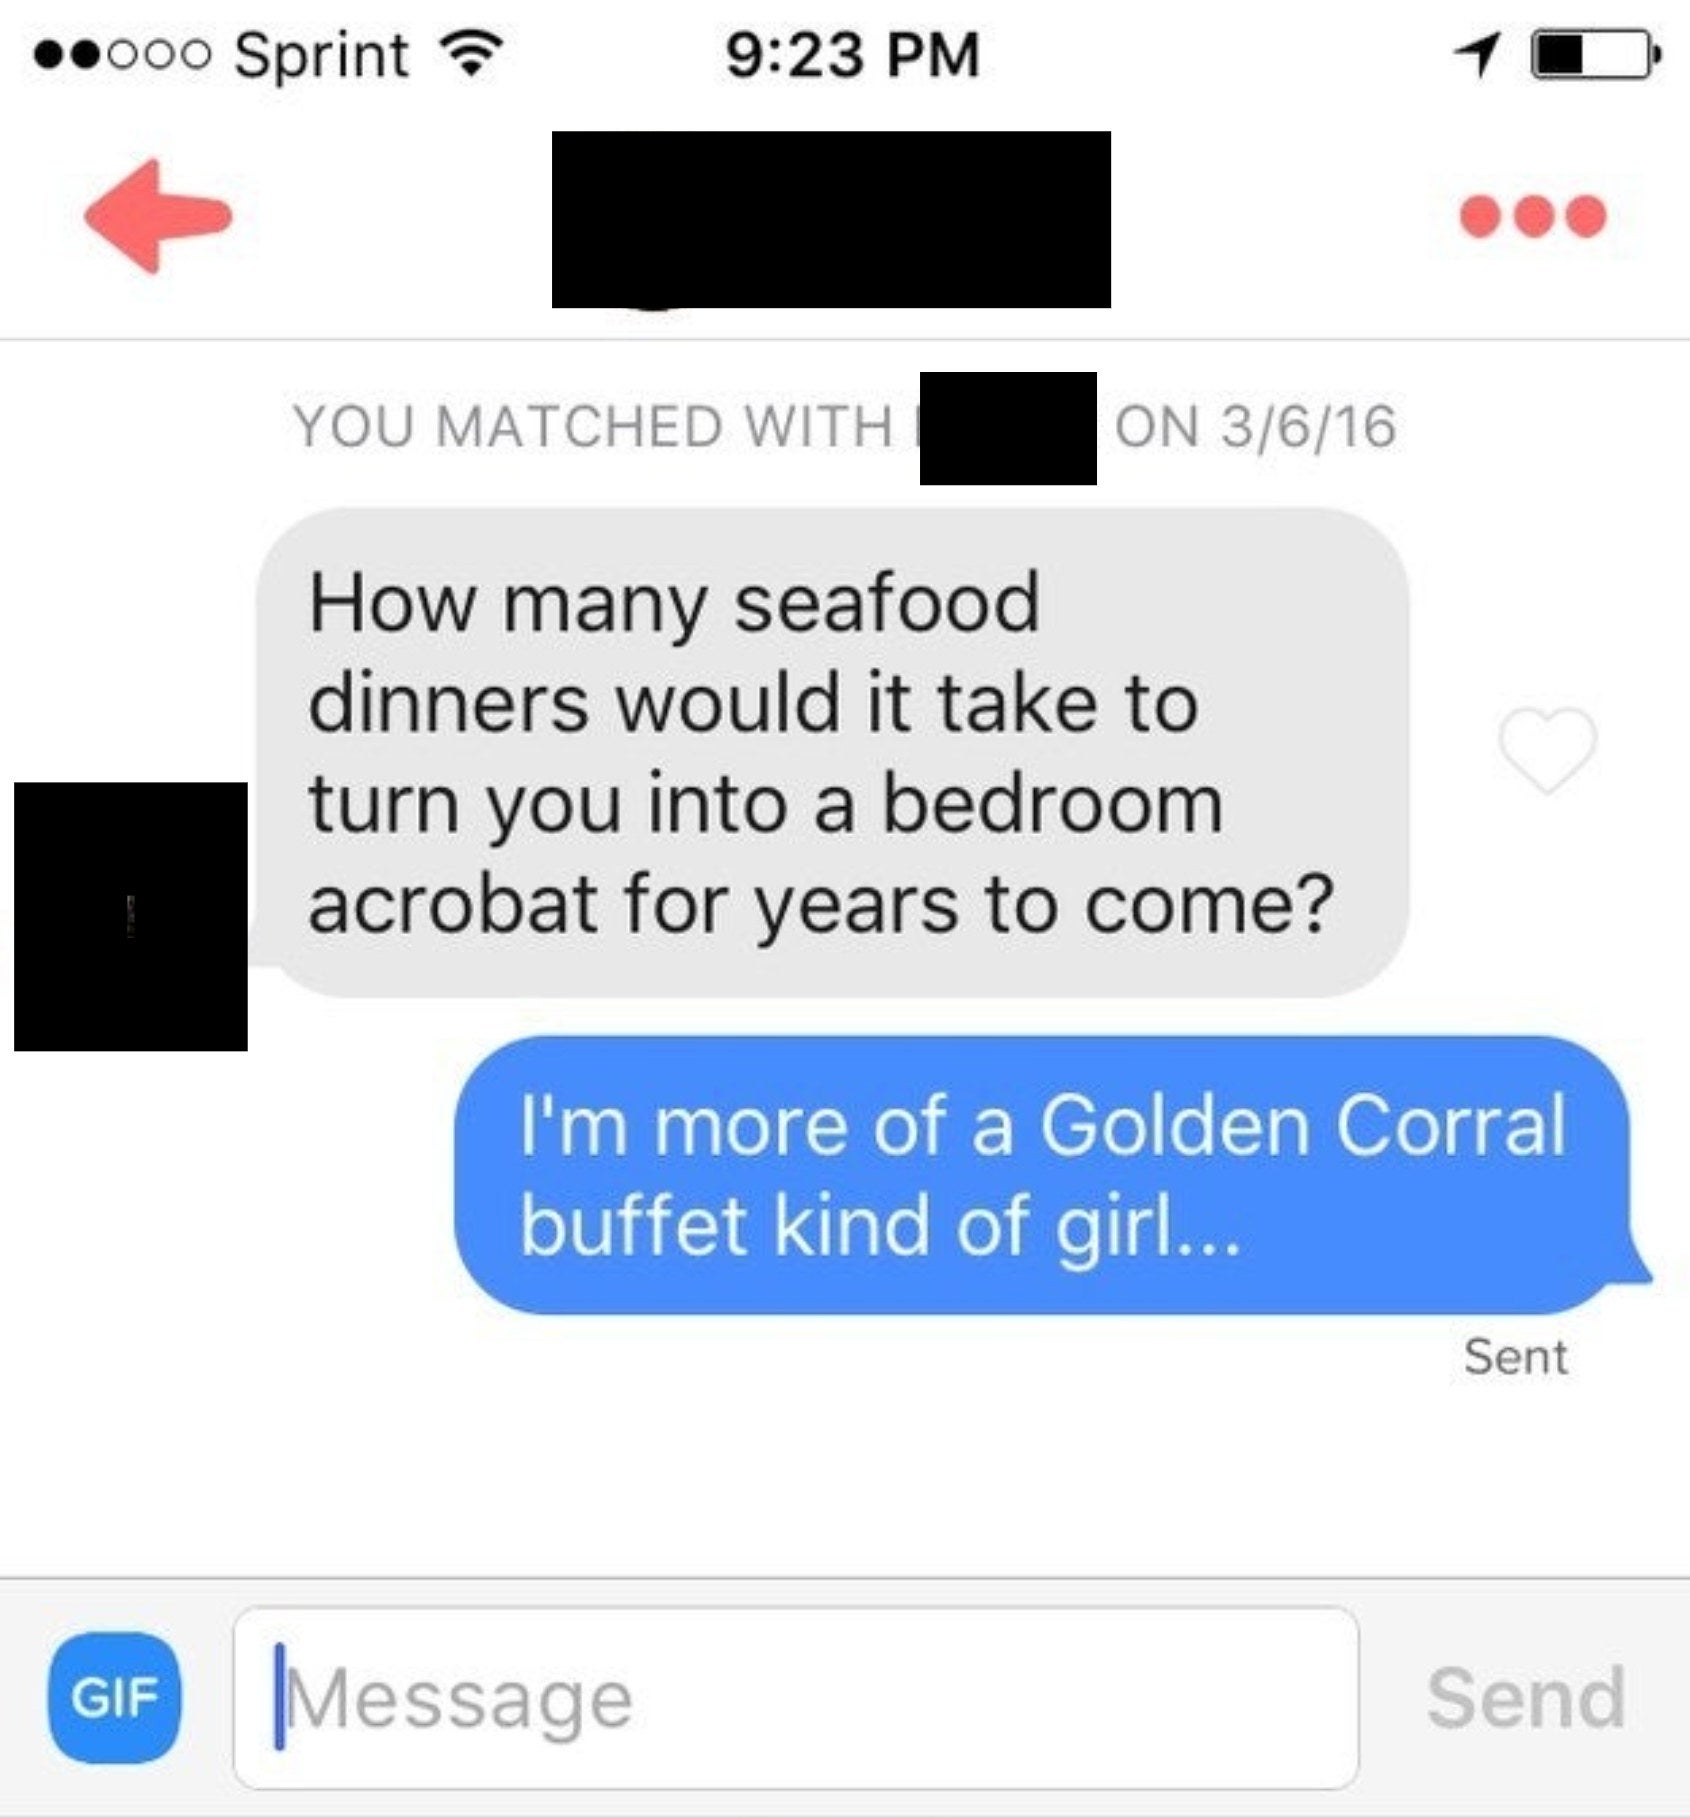 A message asking, &quot;How many seafood dinners would it take to turn you into a bedroom acrobat for years to come?&quot; with the response, &quot;I&#x27;m more of a Golden Corral buffet kind of girl&quot;